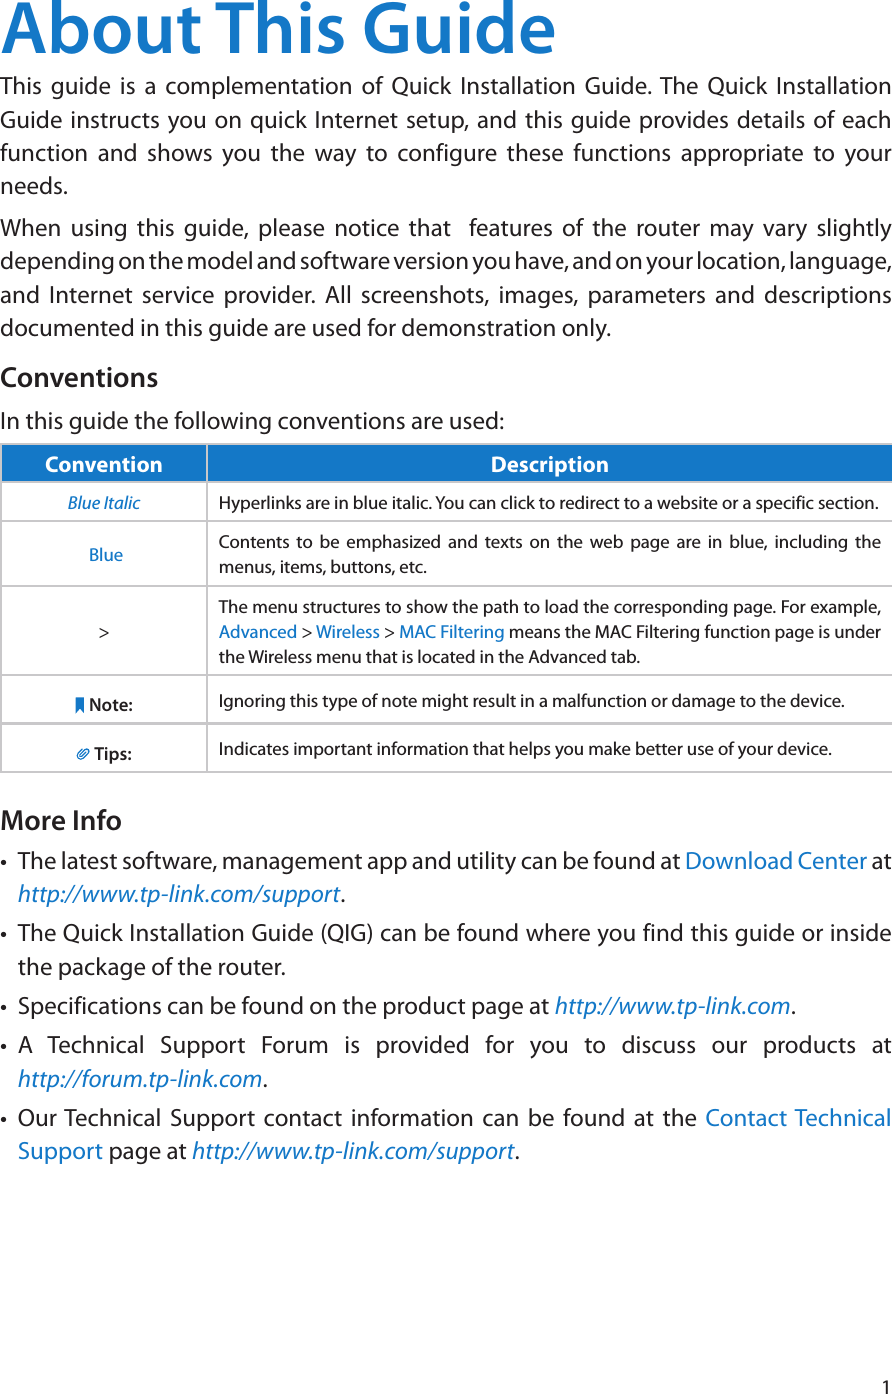 1About This GuideThis guide is a complementation of Quick Installation Guide. The Quick Installation Guide instructs you on quick Internet setup, and this guide provides details of each function and shows you the way to configure these functions appropriate to your needs. When using this guide, please notice that  features of the router may vary slightly depending on the model and software version you have, and on your location, language, and Internet service provider. All screenshots, images, parameters and descriptions documented in this guide are used for demonstration only.ConventionsIn this guide the following conventions are used:Convention DescriptionBlue Italic Hyperlinks are in blue italic. You can click to redirect to a website or a specific section. Blue Contents to be emphasized and texts on the web page are in blue, including the menus, items, buttons, etc.&gt;The menu structures to show the path to load the corresponding page. For example, Advanced &gt; Wireless &gt; MAC Filtering means the MAC Filtering function page is under the Wireless menu that is located in the Advanced tab.Note: Ignoring this type of note might result in a malfunction or damage to the device.Tips: Indicates important information that helps you make better use of your device.More Info•  The latest software, management app and utility can be found at Download Center at http://www.tp-link.com/support.•  The Quick Installation Guide (QIG) can be found where you find this guide or inside the package of the router.•  Specifications can be found on the product page at http://www.tp-link.com.•  A Technical Support Forum is provided for you to discuss our products at  http://forum.tp-link.com.•  Our Technical Support contact information can be found at the Contact Technical Support page at http://www.tp-link.com/support.